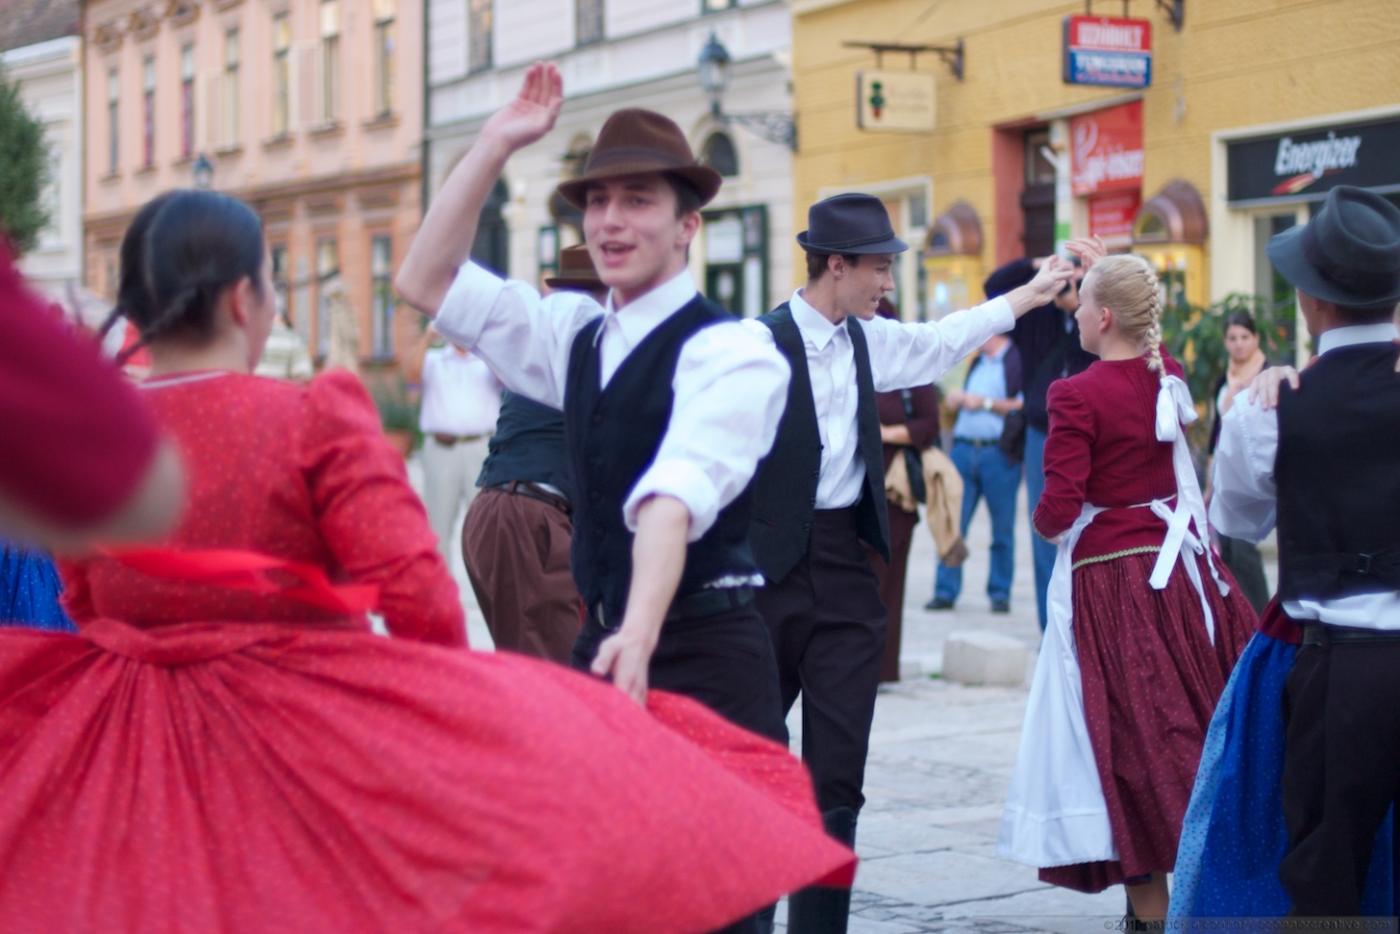 Dancers in the square at Pécs, Hungary